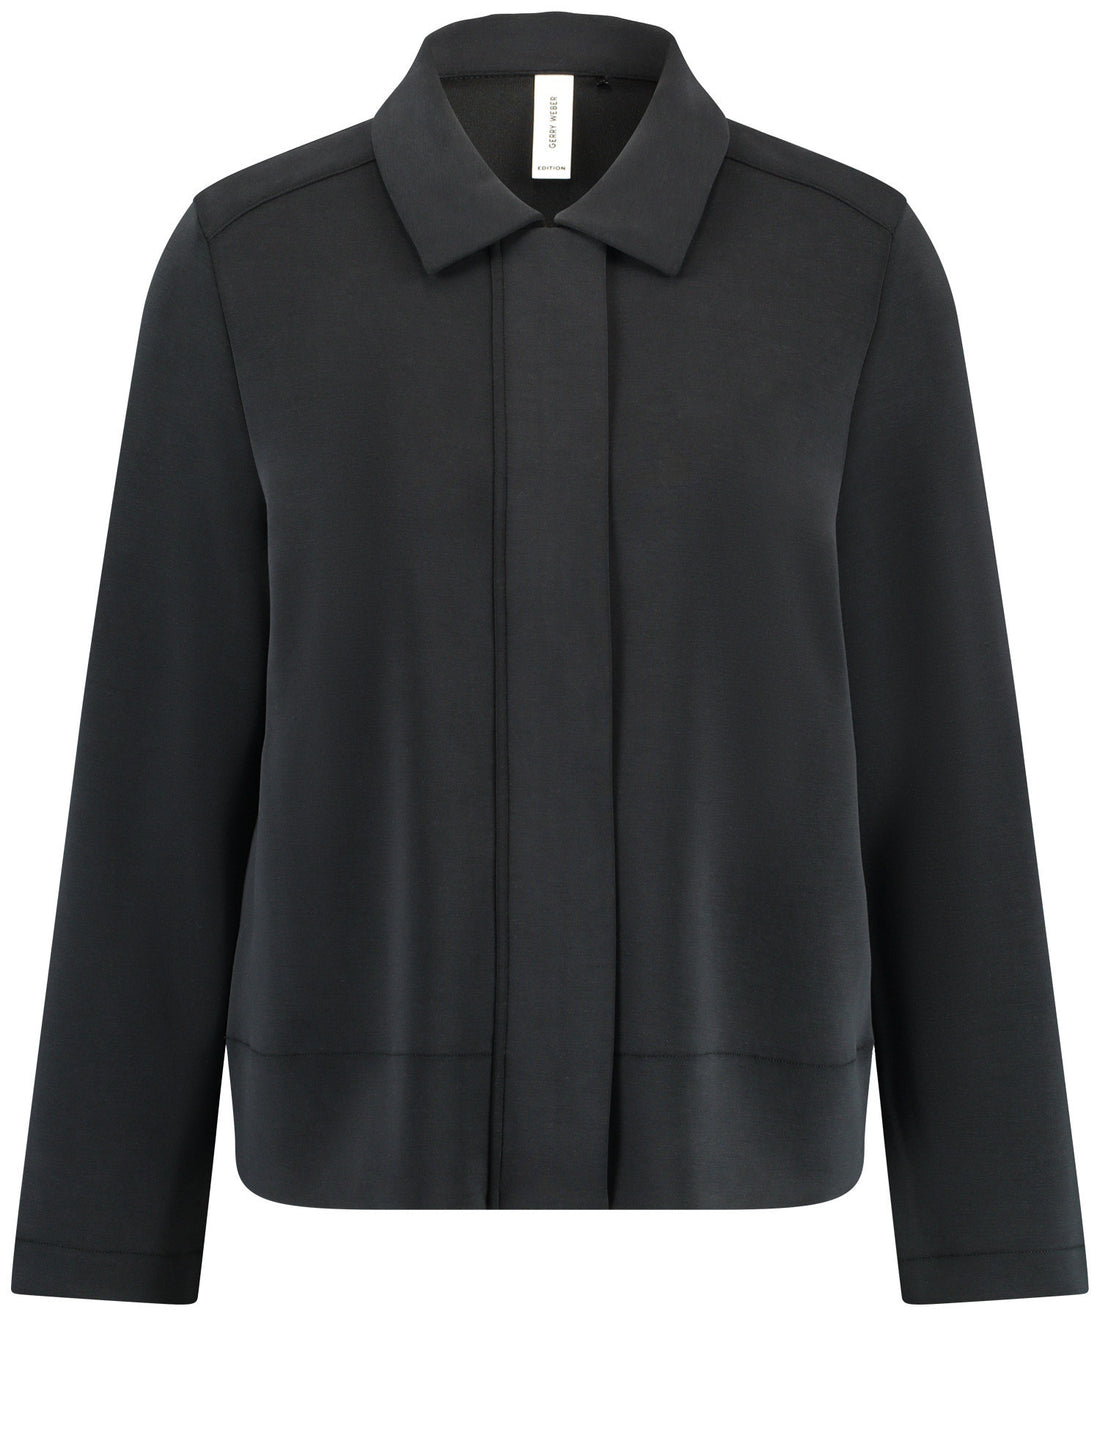 Black Jacket With Covered Placket_130005-44020_11000_01